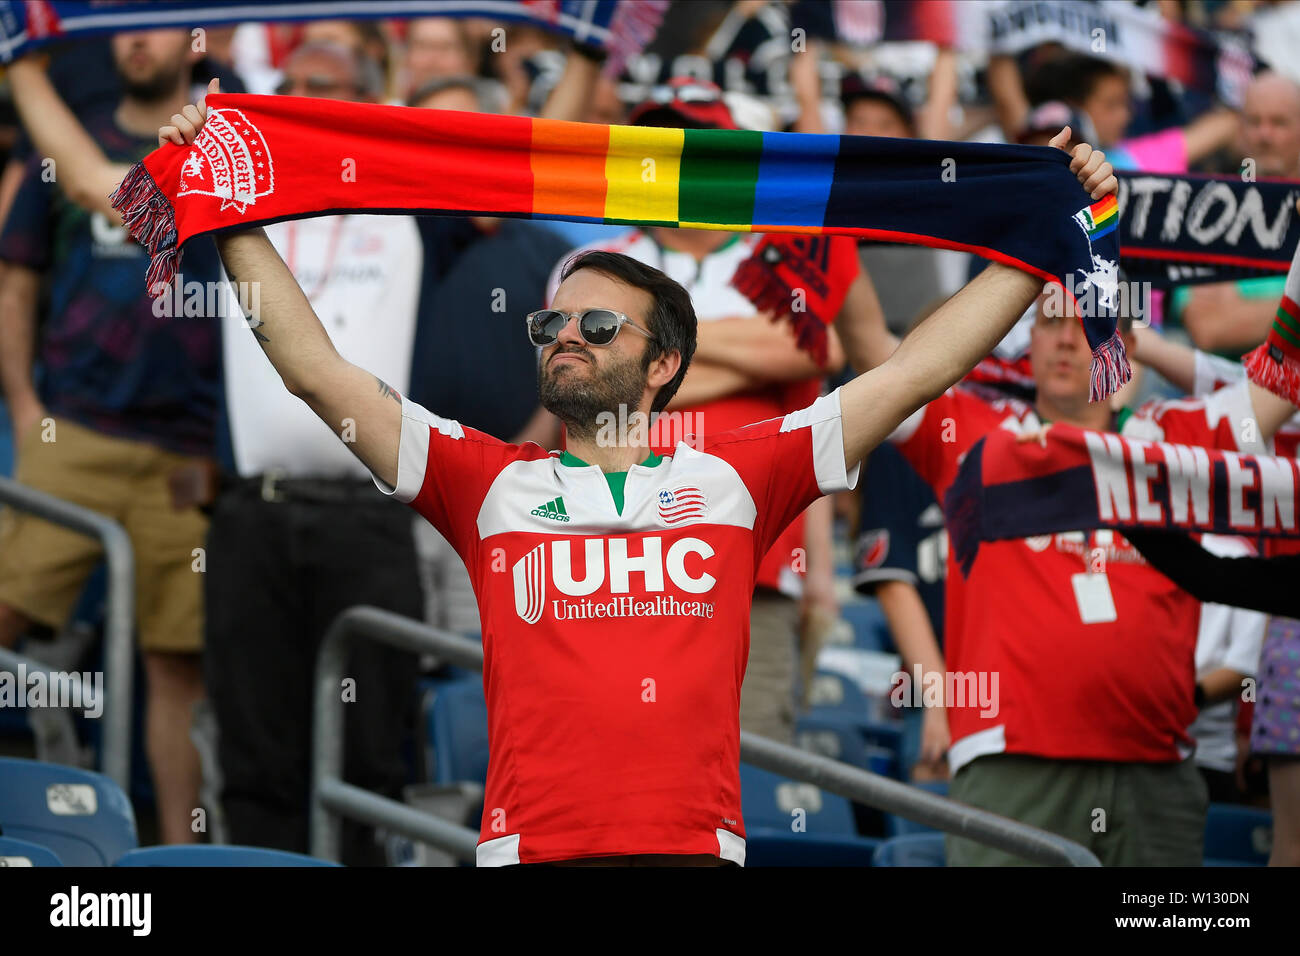 Regulation Time. 29th June, 2019. A fan holds up a pride scarf during the national anthem before the MLS game between the Houston Dynamo and the New England Revolution held at Gillette Stadium in Foxborough Massachusetts. The Revolution defeat the Dynamo 2-1 in regulation time. Eric Canha/CSM/Alamy Live News Stock Photo